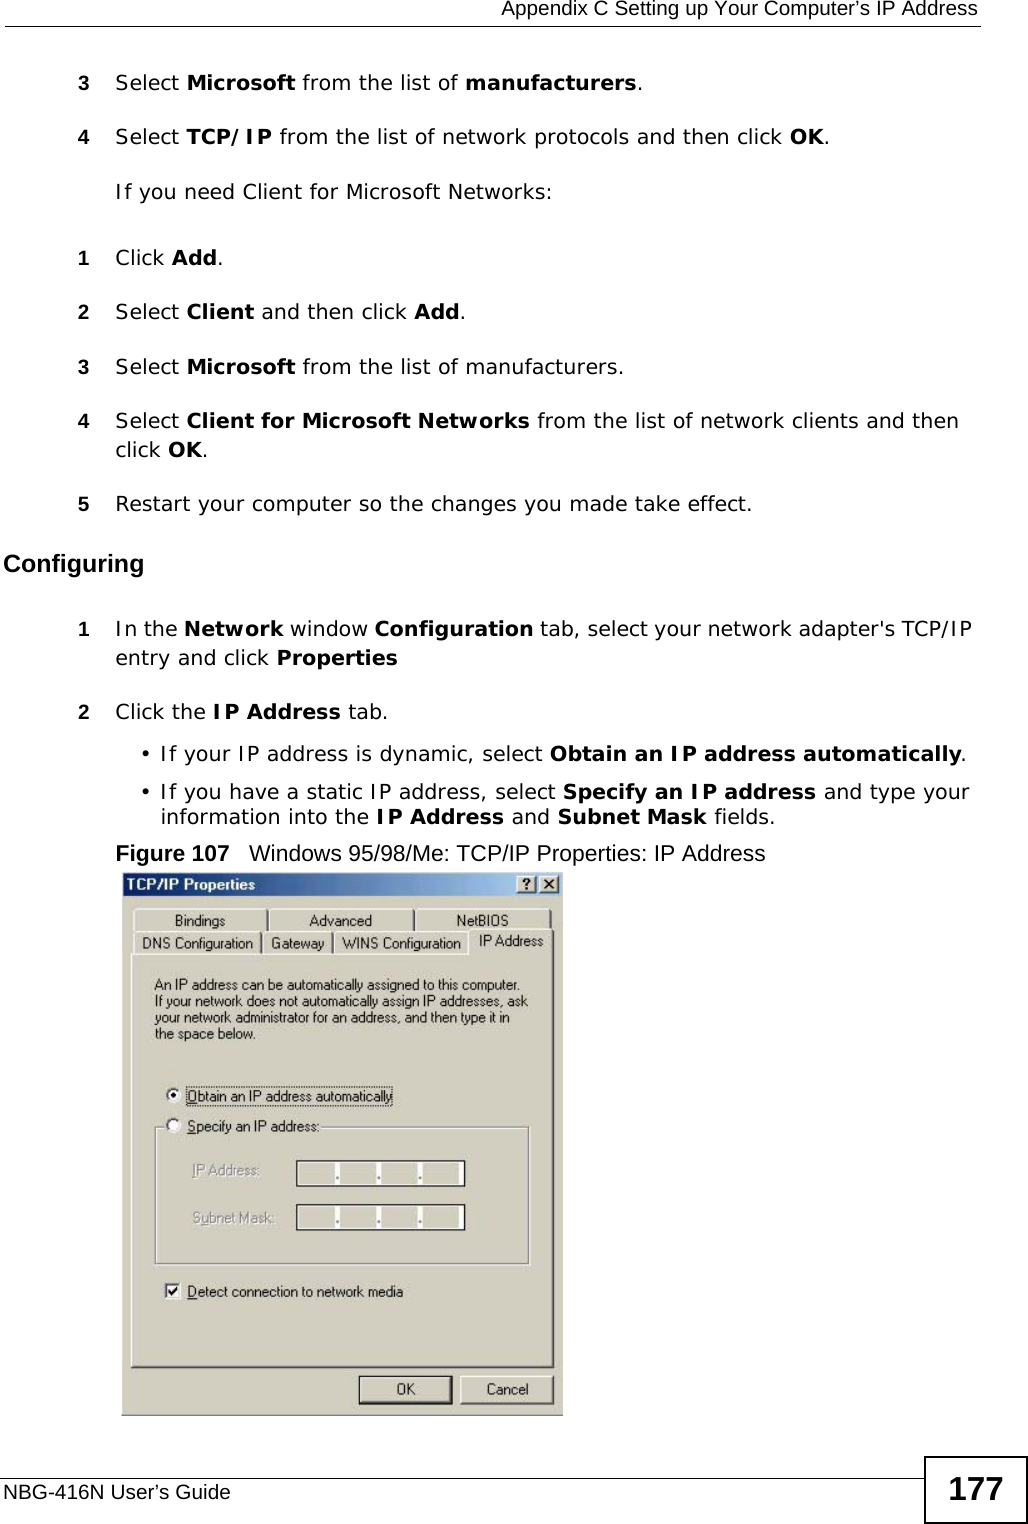  Appendix C Setting up Your Computer’s IP AddressNBG-416N User’s Guide 1773Select Microsoft from the list of manufacturers.4Select TCP/IP from the list of network protocols and then click OK.If you need Client for Microsoft Networks:1Click Add.2Select Client and then click Add.3Select Microsoft from the list of manufacturers.4Select Client for Microsoft Networks from the list of network clients and then click OK.5Restart your computer so the changes you made take effect.Configuring 1In the Network window Configuration tab, select your network adapter&apos;s TCP/IP entry and click Properties2Click the IP Address tab.• If your IP address is dynamic, select Obtain an IP address automatically. • If you have a static IP address, select Specify an IP address and type your information into the IP Address and Subnet Mask fields.Figure 107   Windows 95/98/Me: TCP/IP Properties: IP Address